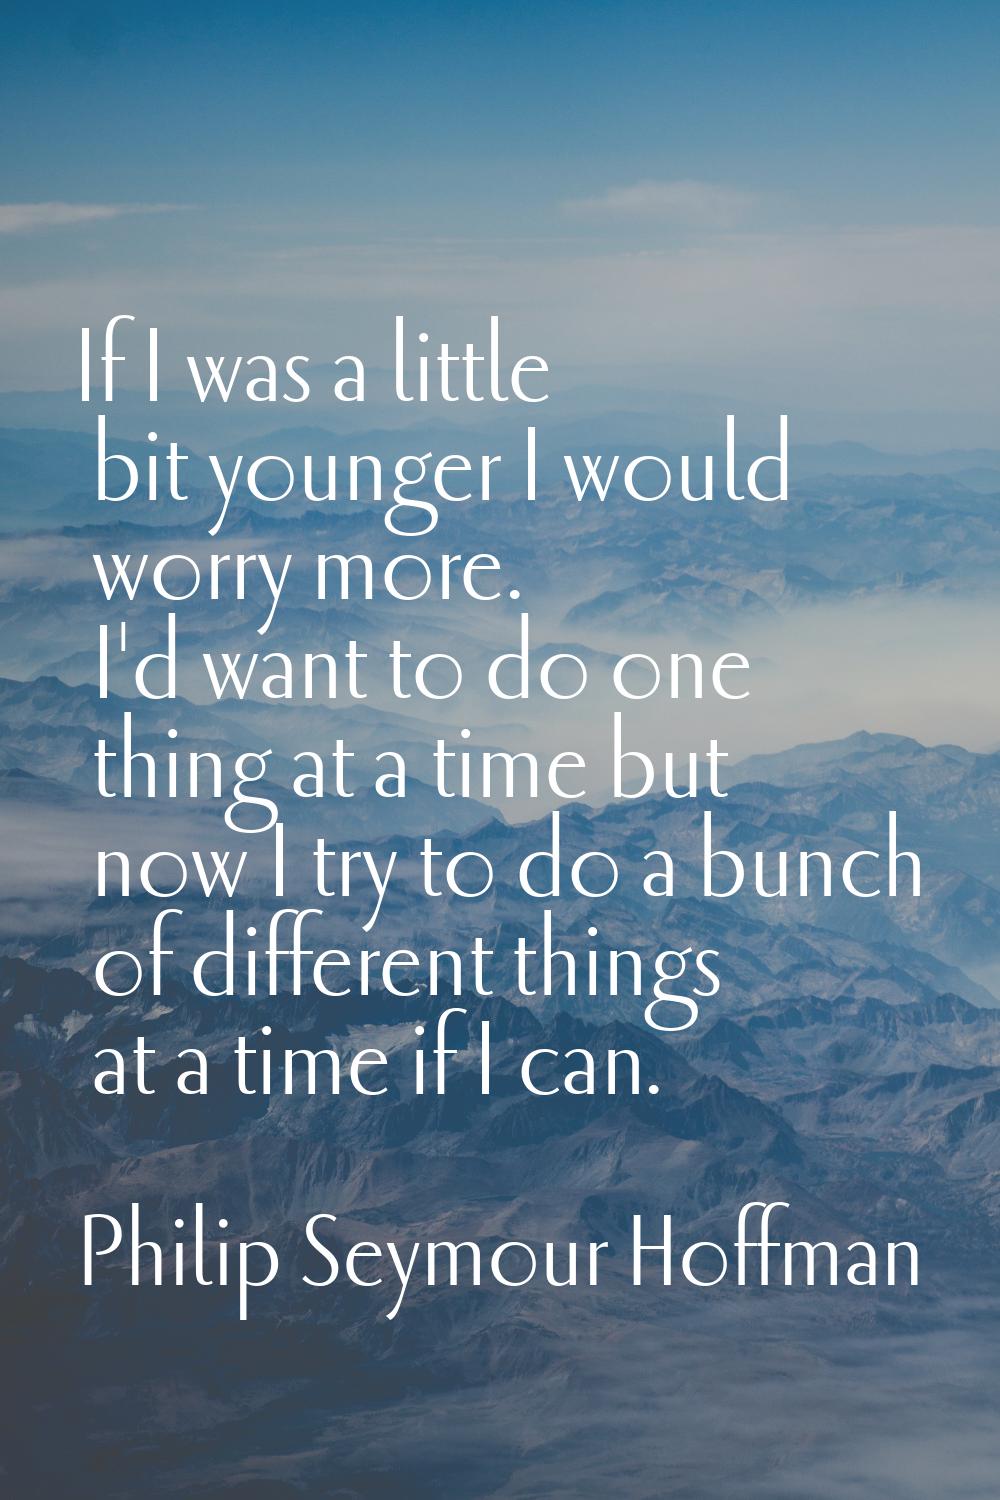 If I was a little bit younger I would worry more. I'd want to do one thing at a time but now I try 